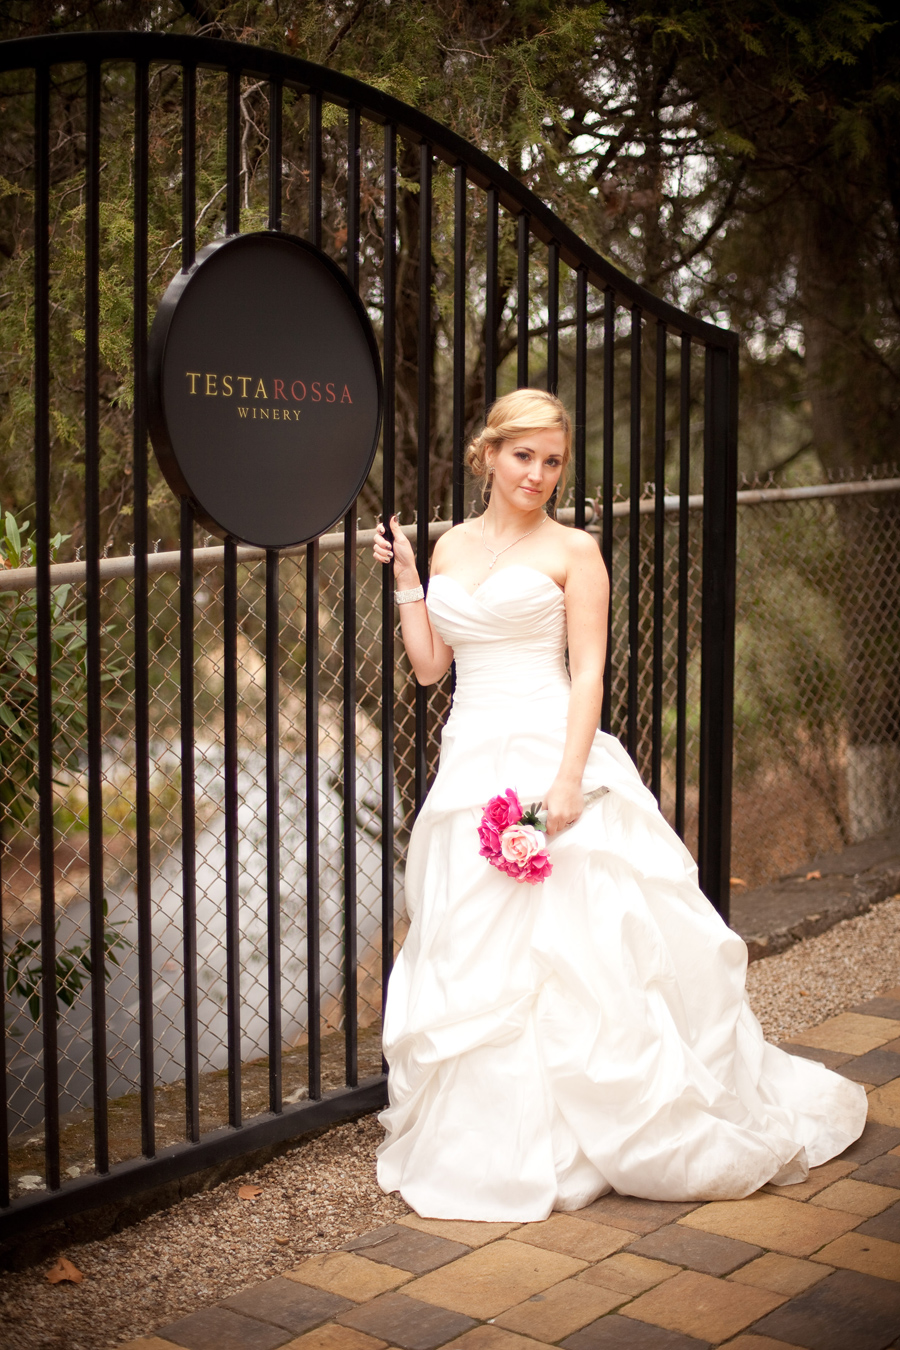 The brides stands next to the Testarossa Winery sign.